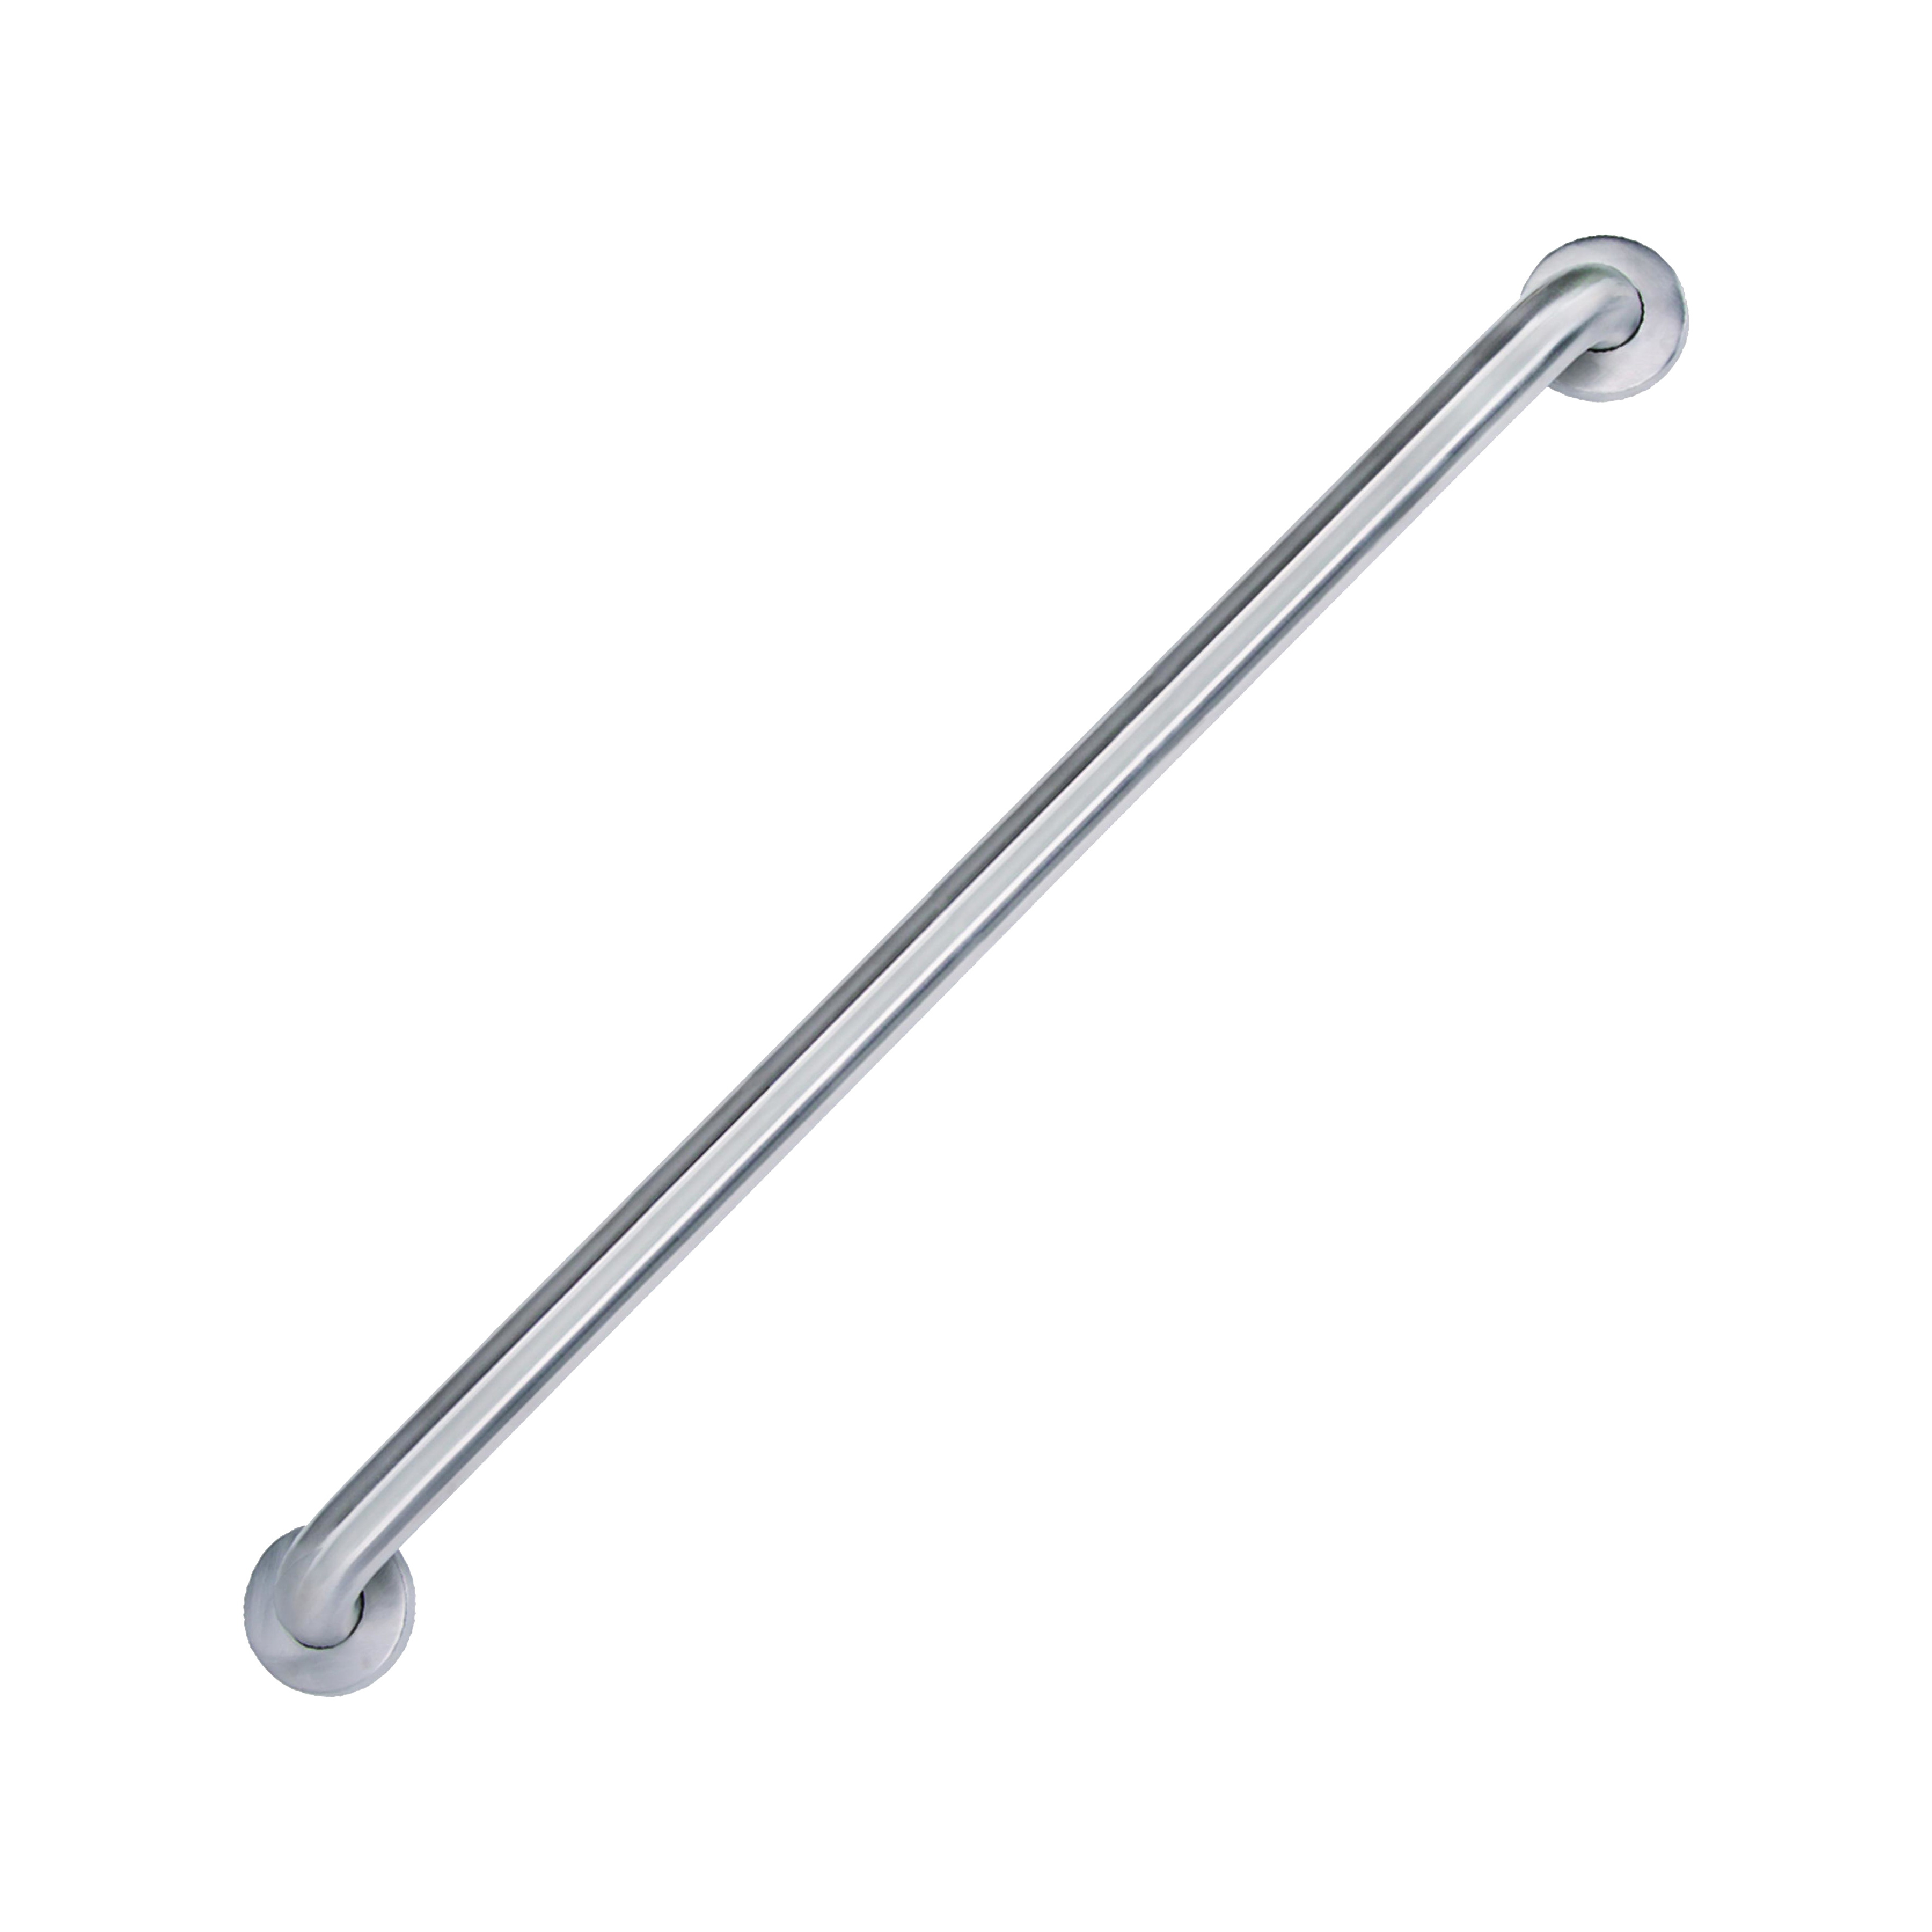 SG01-01&0132 Safety Grab Bar, 32 in L Bar, Stainless Steel, Wall Mounted Mounting